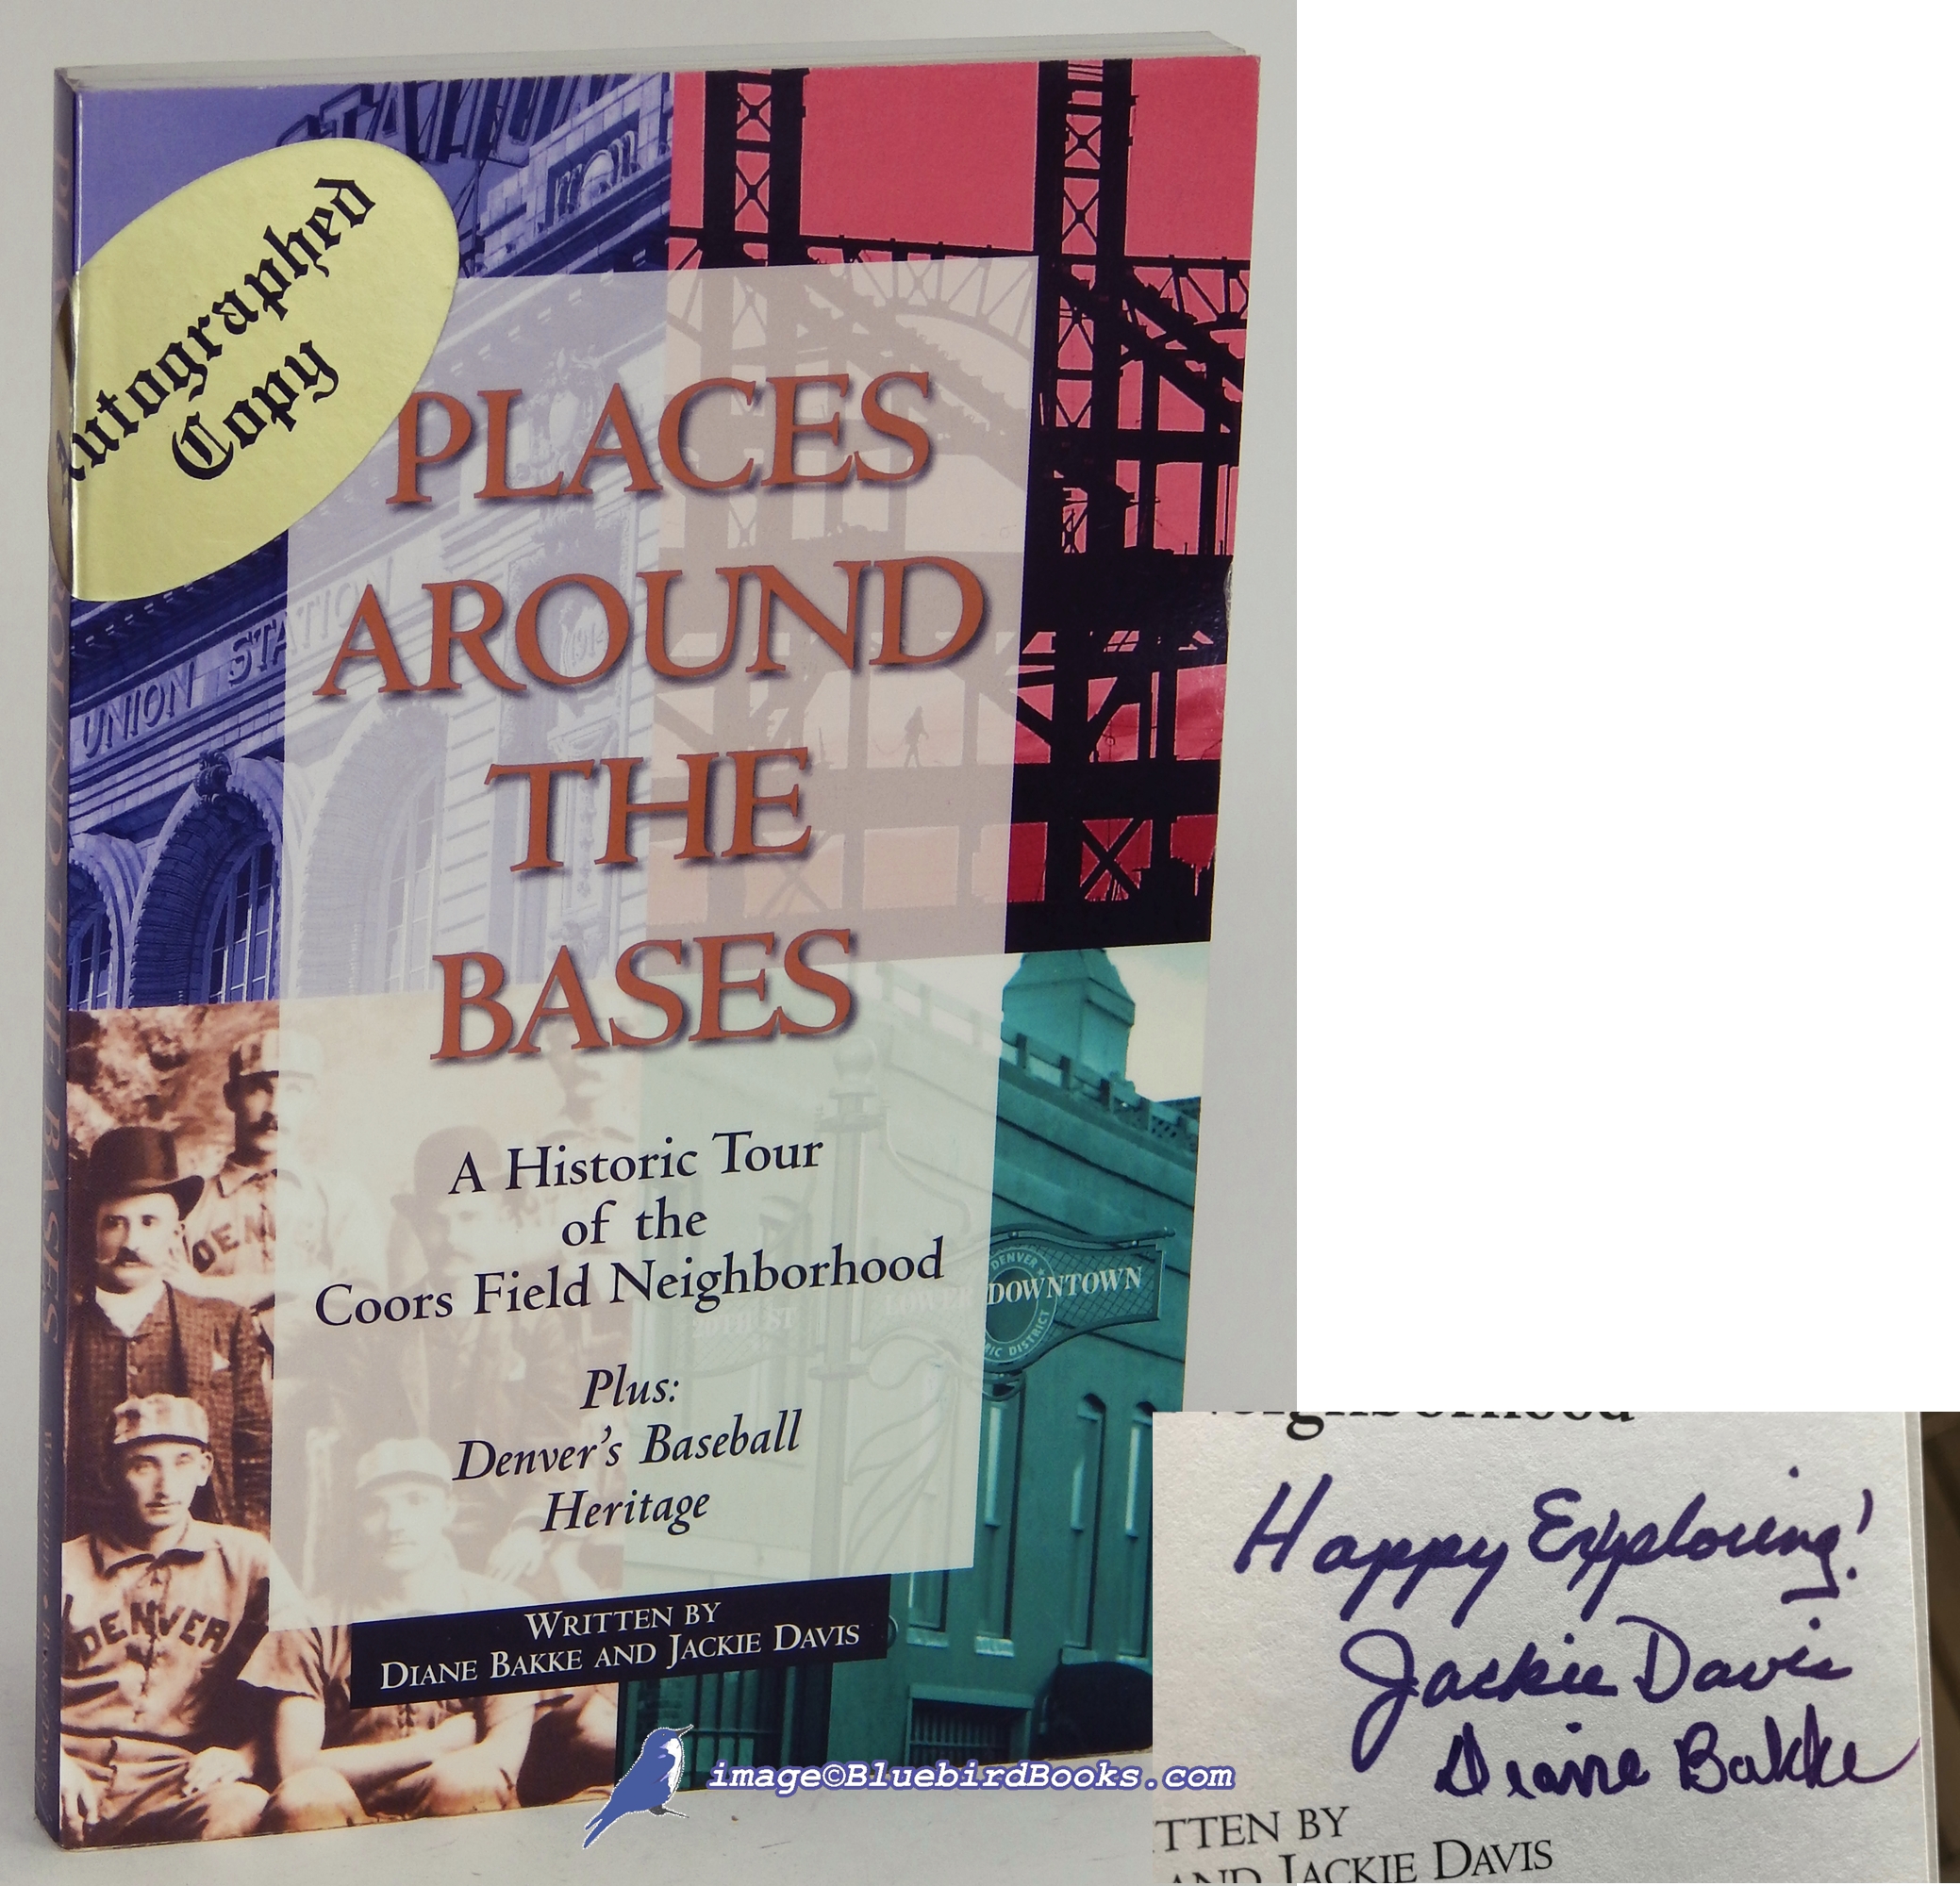 BAKKE, DIANE; DAVIS, JACKIE - Places Around the Bases: A Historic Tour of the Coors Field Neighborhood, Plus Denver's Baseball Heritage